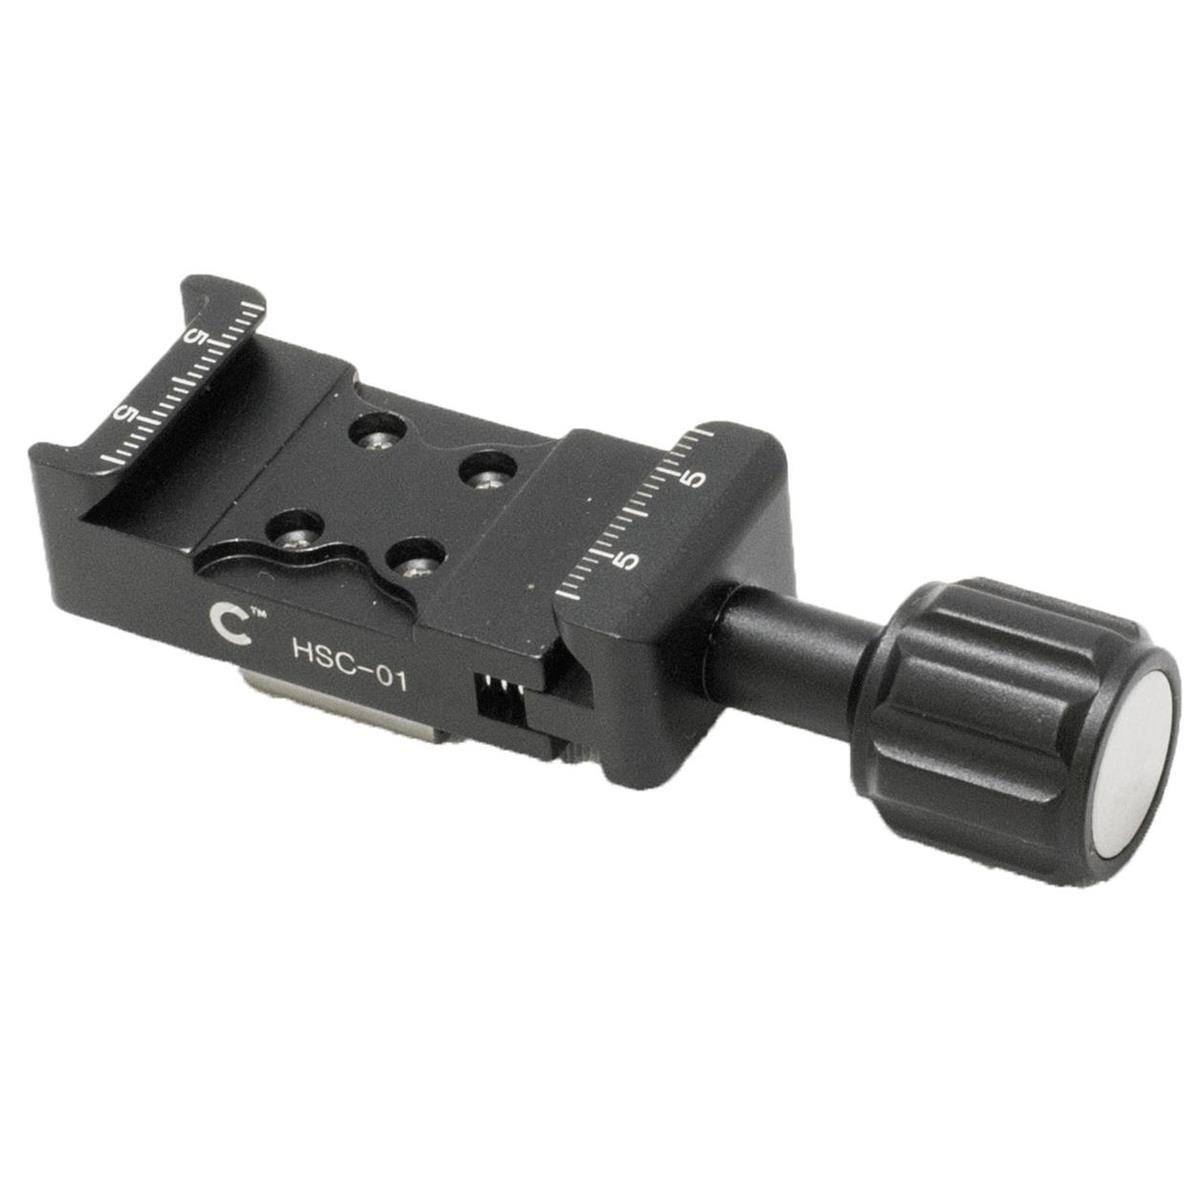 Image of Cinegears Enhanced Precision Dovetail Mount